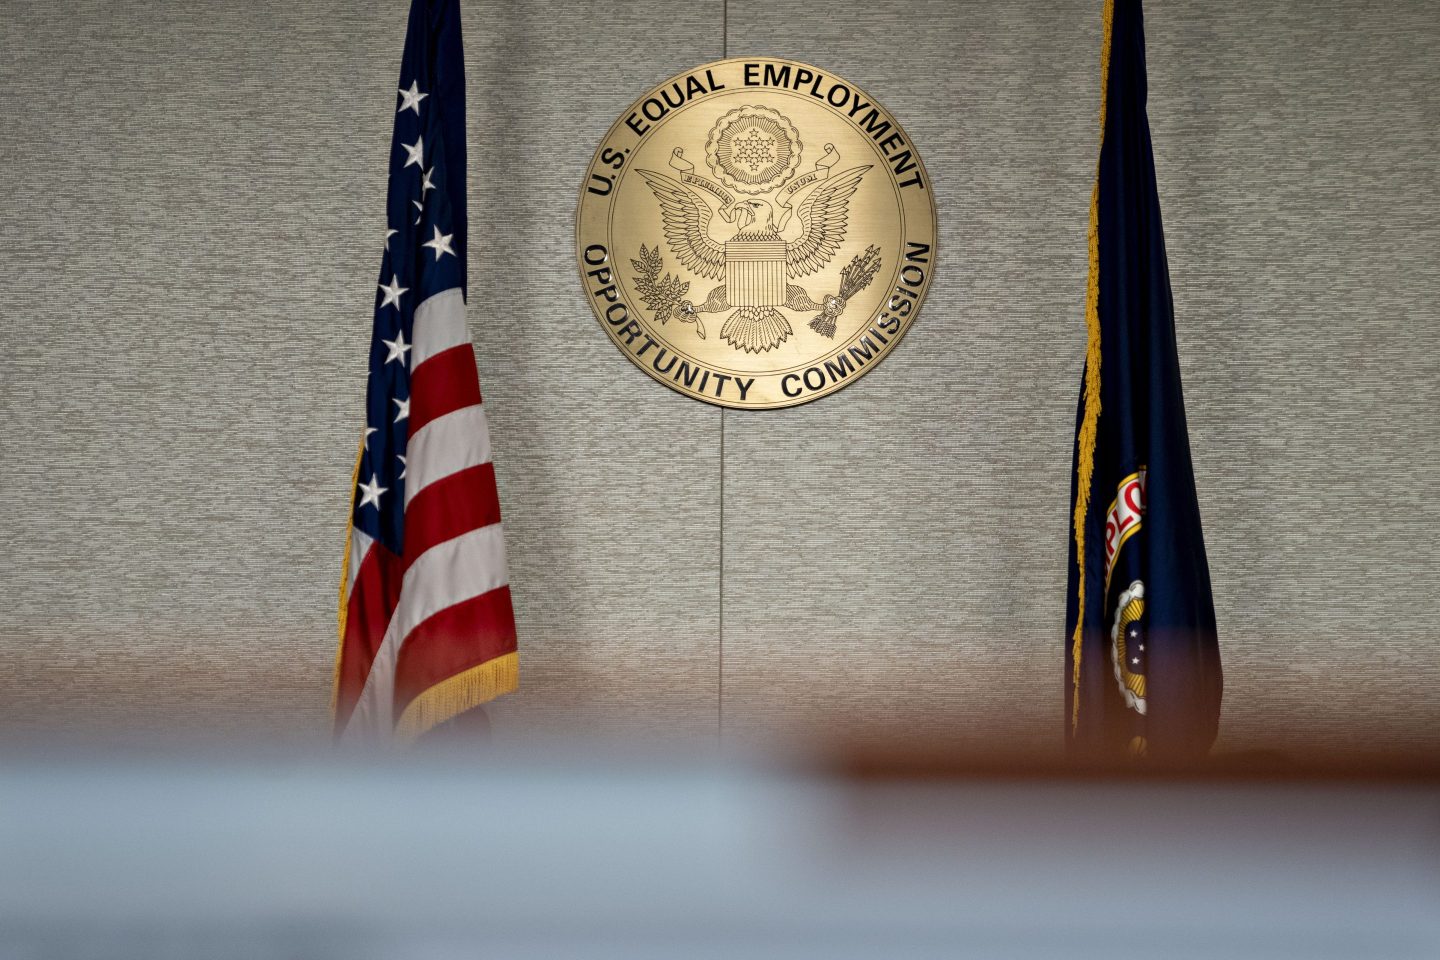 The Equal Employment Opportunity Commission (EEOC) seal hangs inside a hearing room at the headquarters in Washington, D.C., U.S., on Tuesday, Feb. 18, 2020. The Trump administration wants to cut fiscal year 2021 spending on the Labor Department, National Labor Relations Board, and EEOC, reviving previous belt-tightening bids that have not been approved by Congress. Photographer: Andrew Harrer/Bloomberg via Getty Images